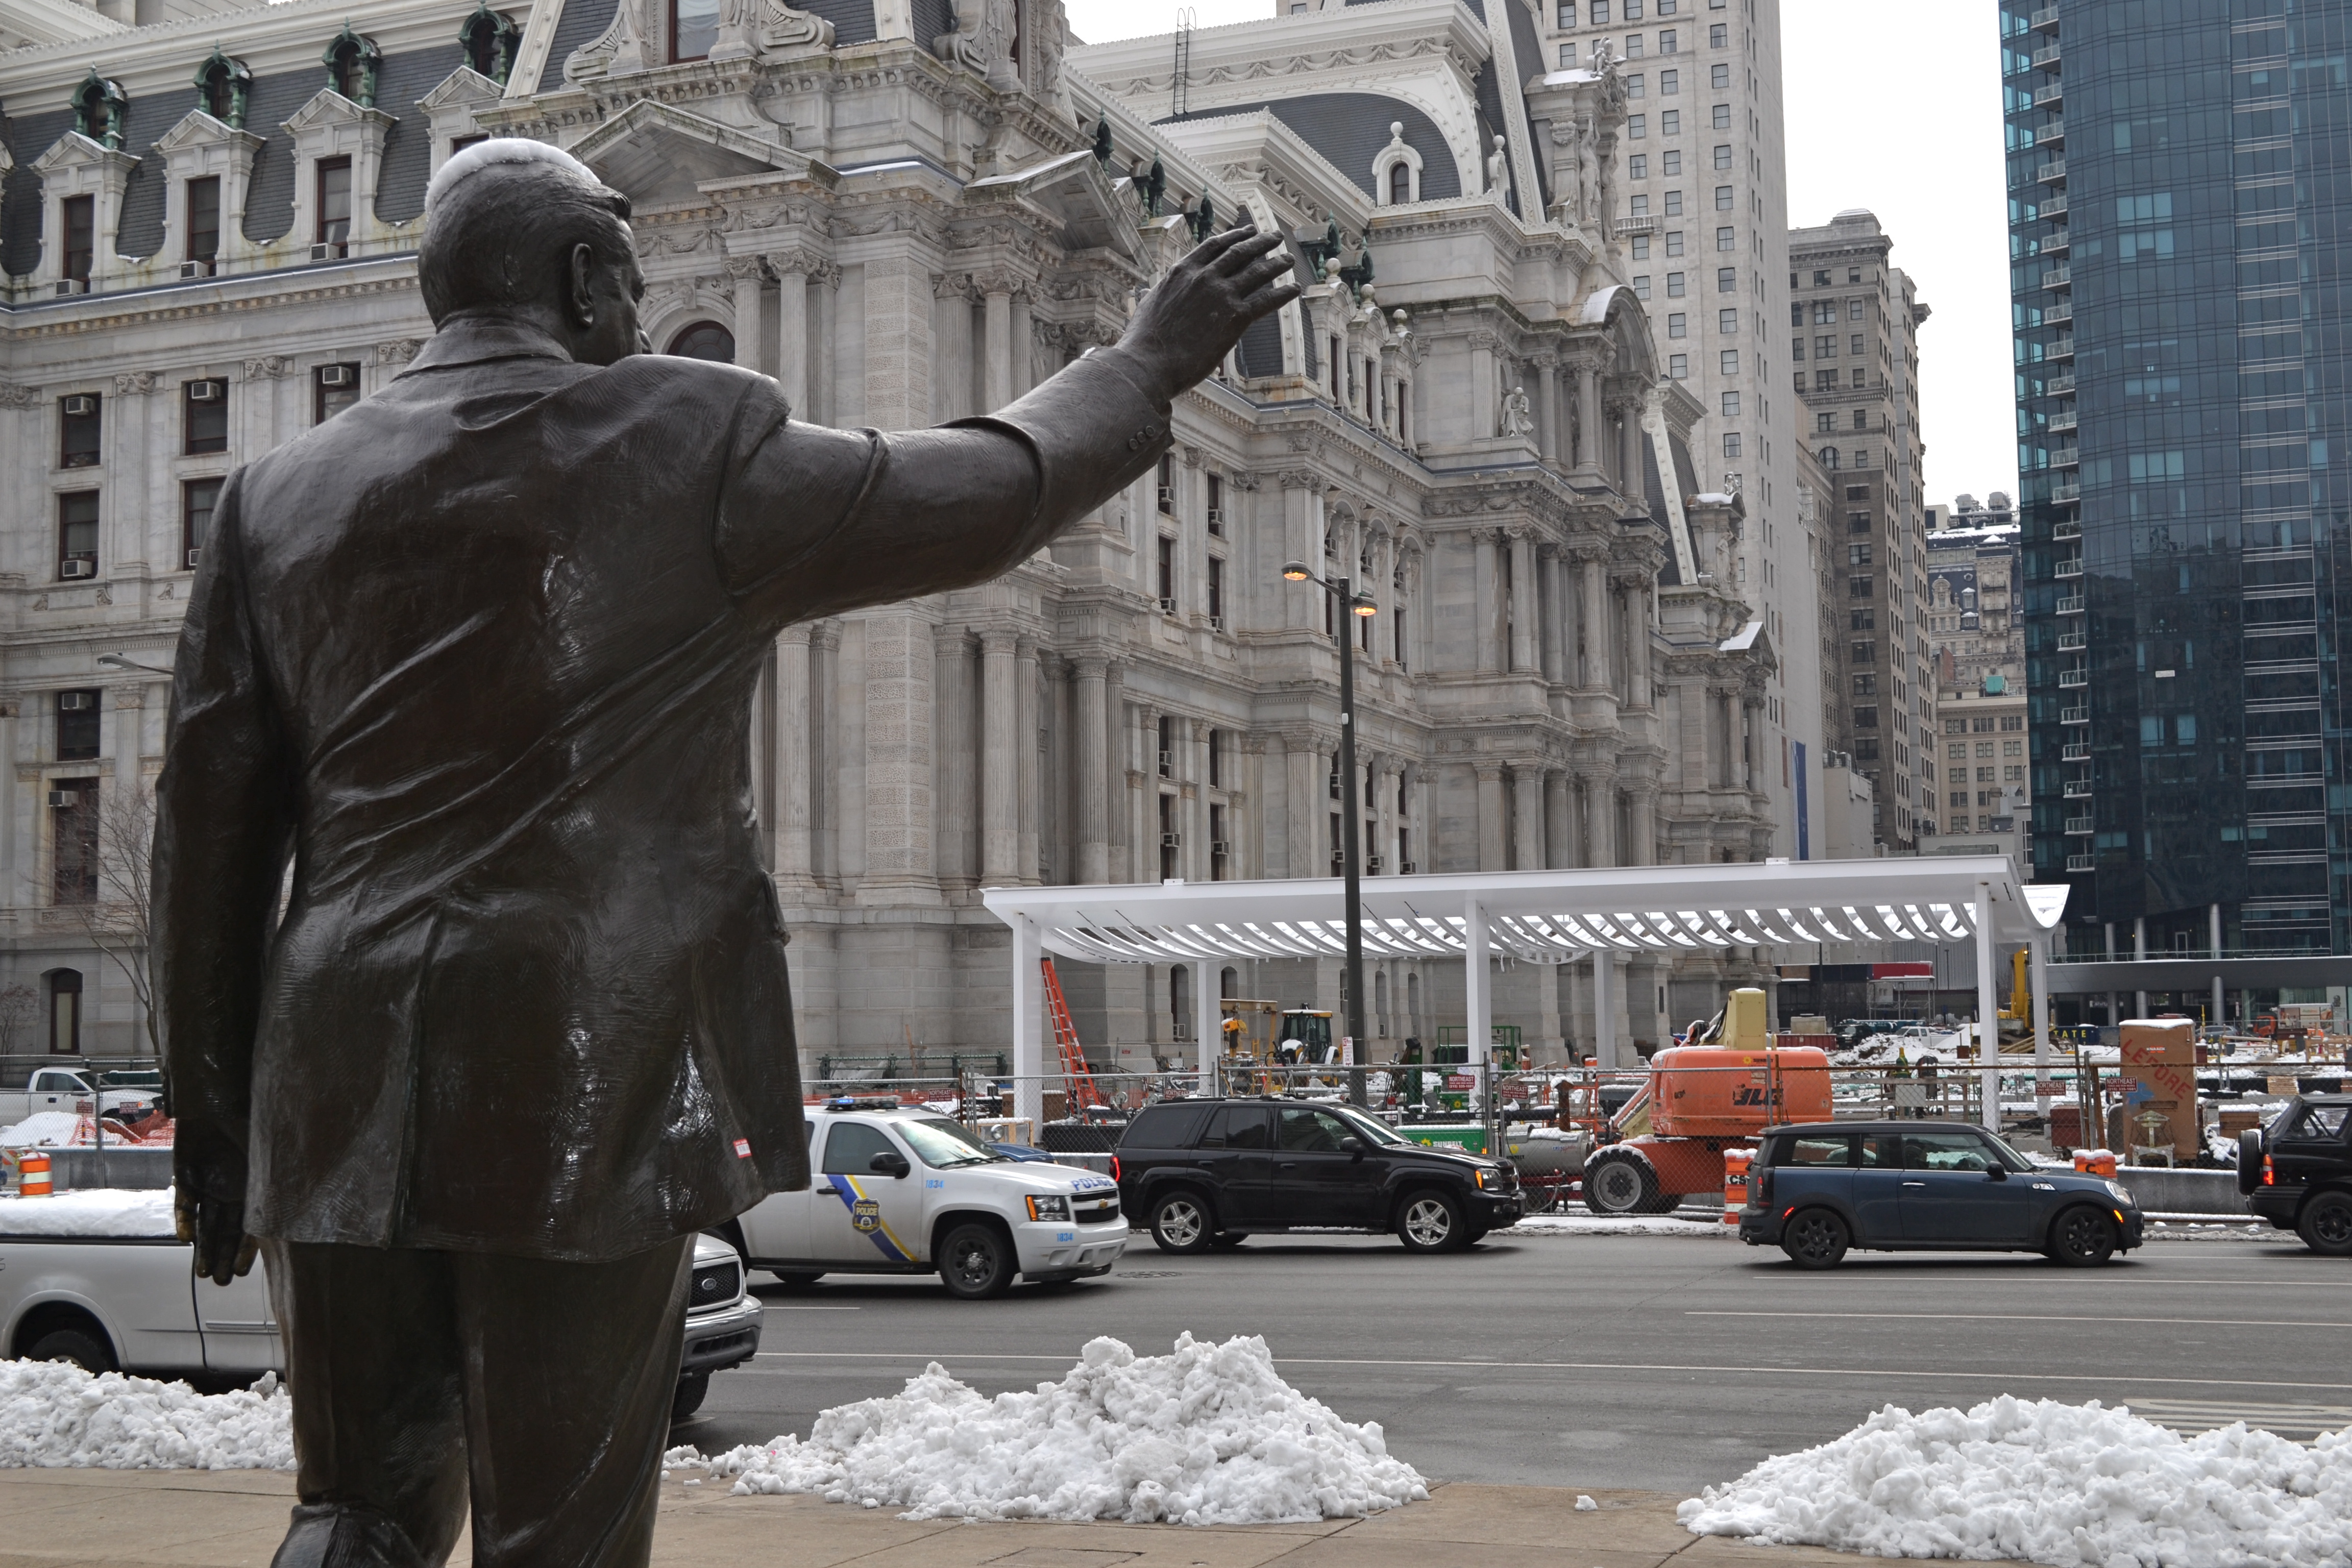 The cafe structure sits directly across from the Municipal Services Building and the Frank Rizzo statue